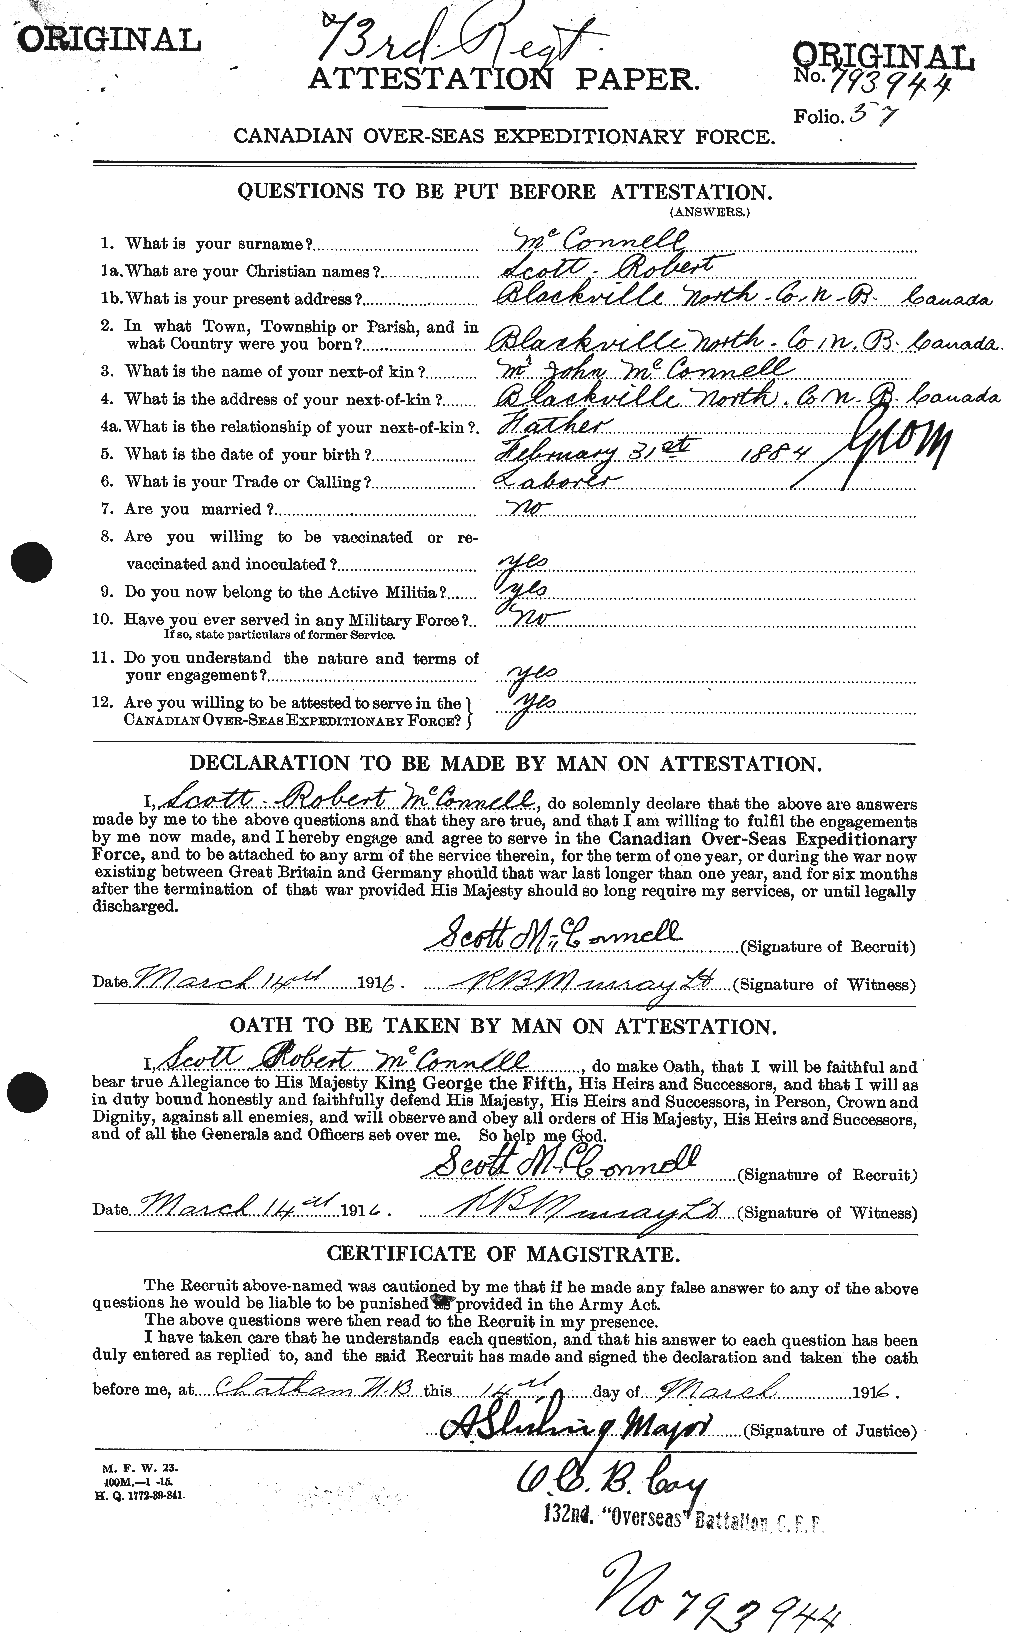 Personnel Records of the First World War - CEF 134381a